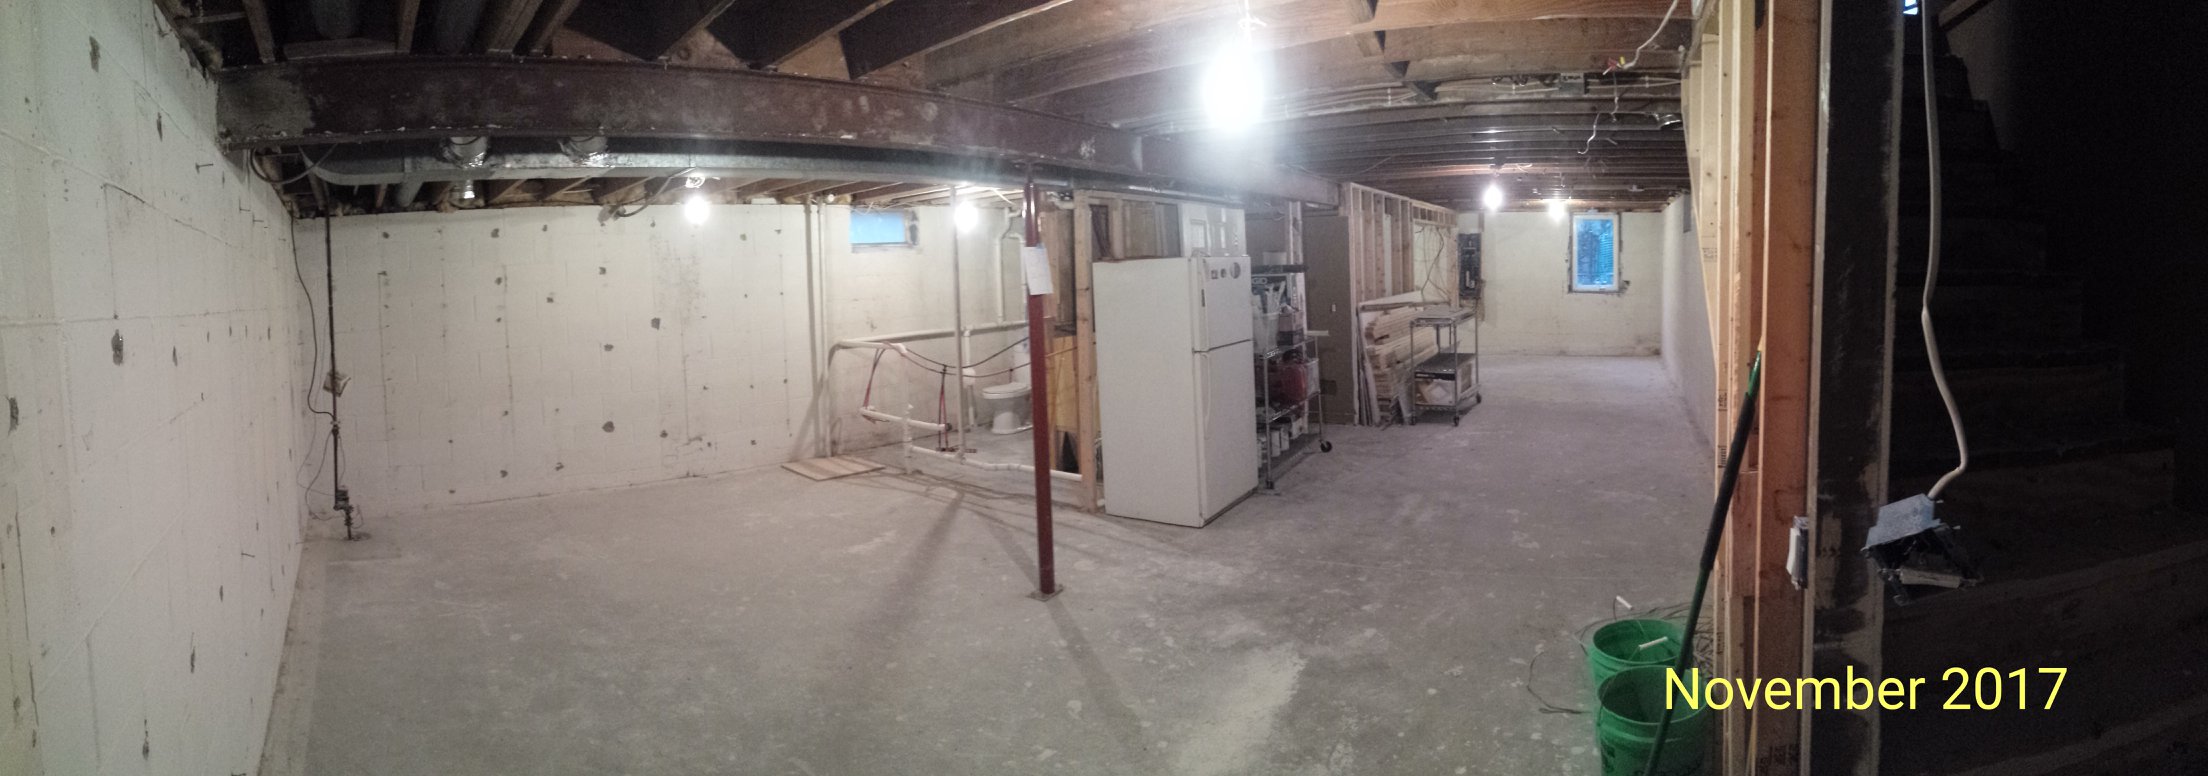 An empty basement with bare walls prepared for drain tile installation.